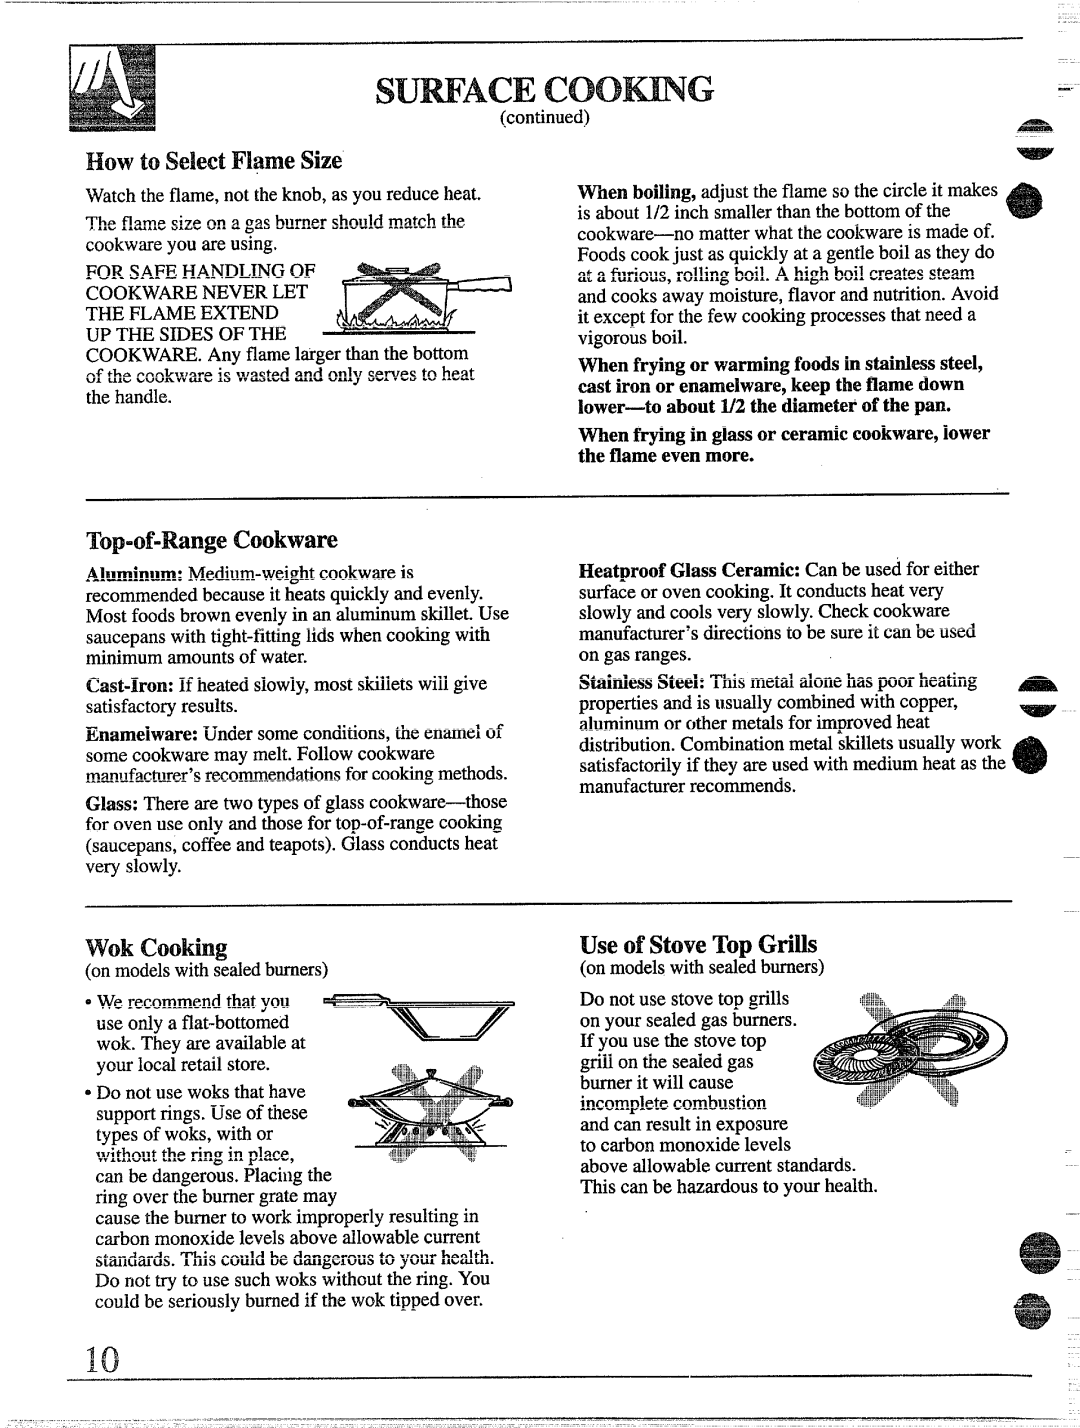 GE 49-8338 installation instructions How toselect Flqme size, TopofRange cookware, Wok cooking 